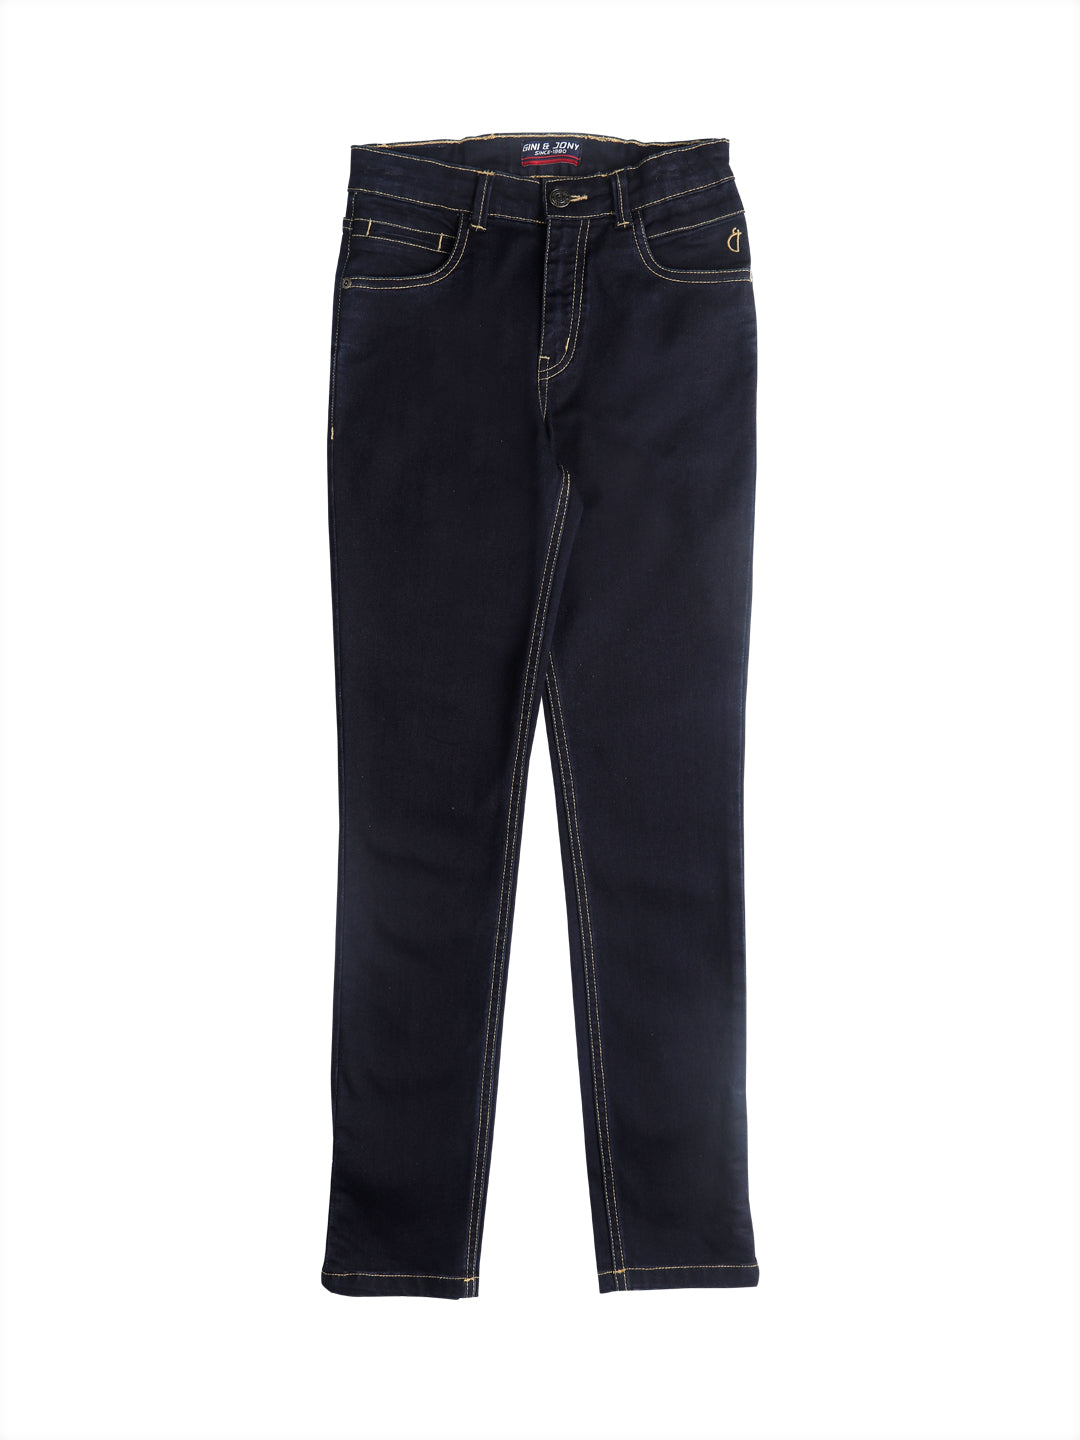 Boys Black Cotton Solid Fixed Waist Jeans